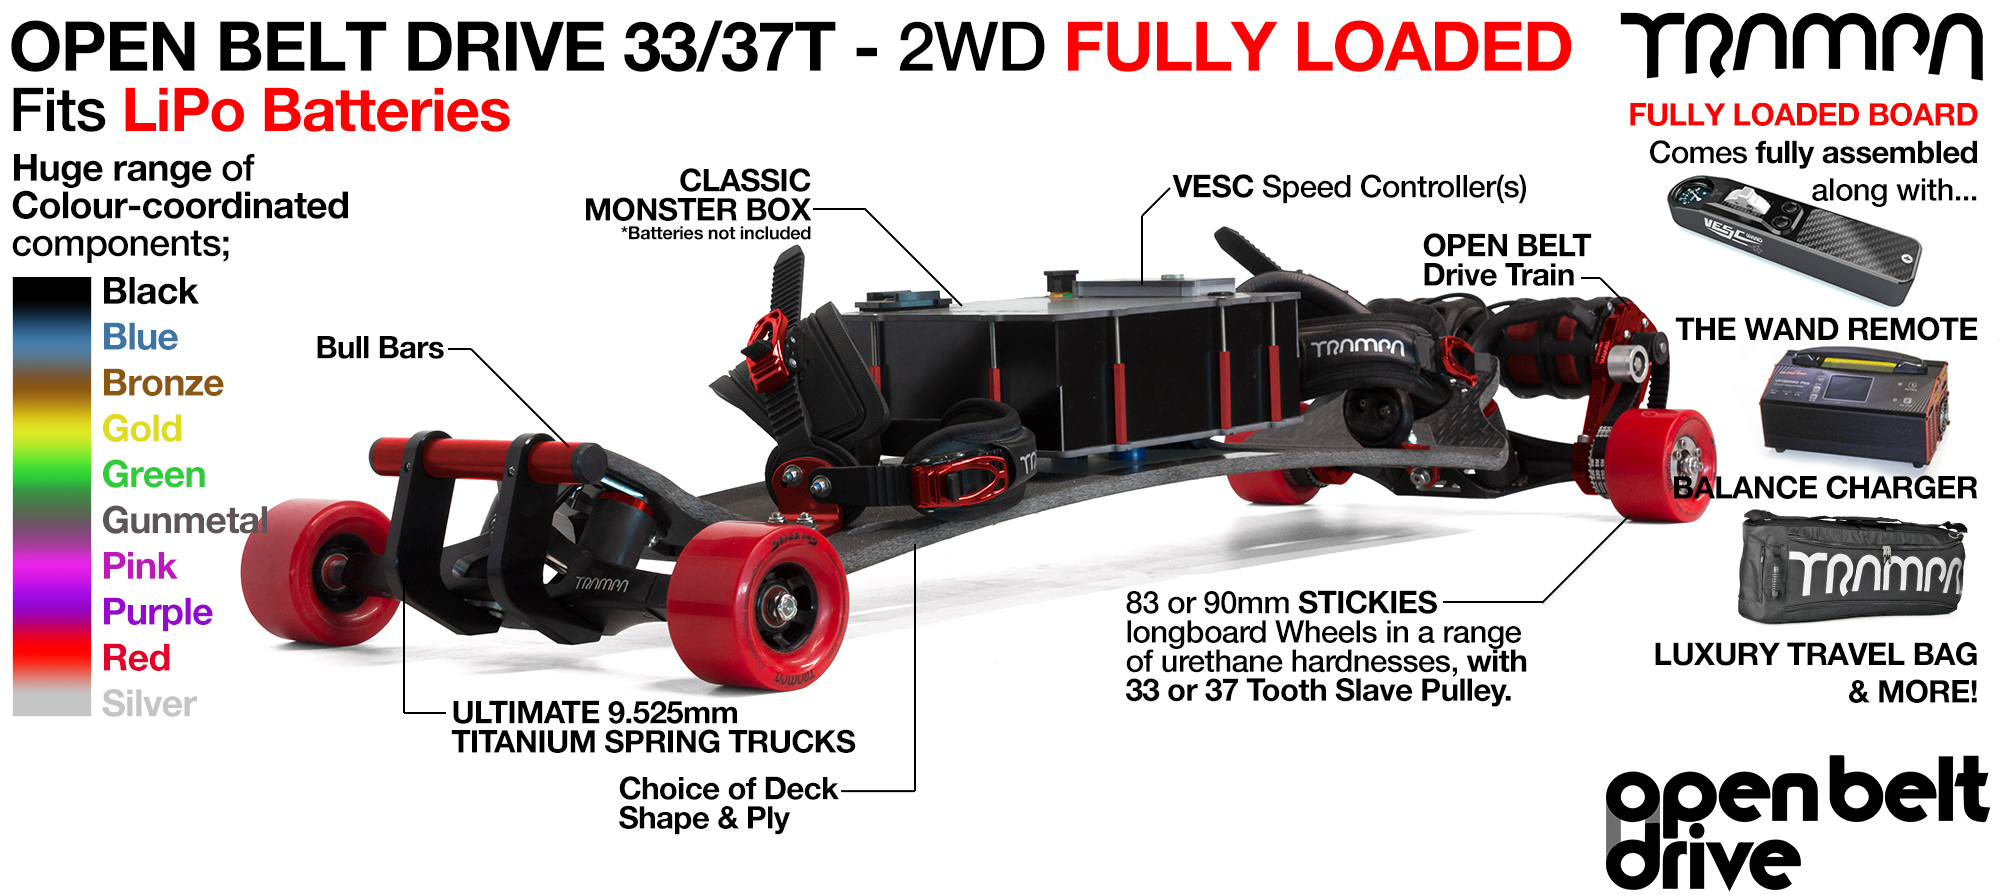 2WD 66T Open Belt Drive TRAMPA E-MTB with 83 or 90mm STICKIES Wheels & 33/37 Tooth Pulleys - FULLY LOADED DOUBLE STACK fits 4x 20.000 mAh Li-Po cells massive Range!